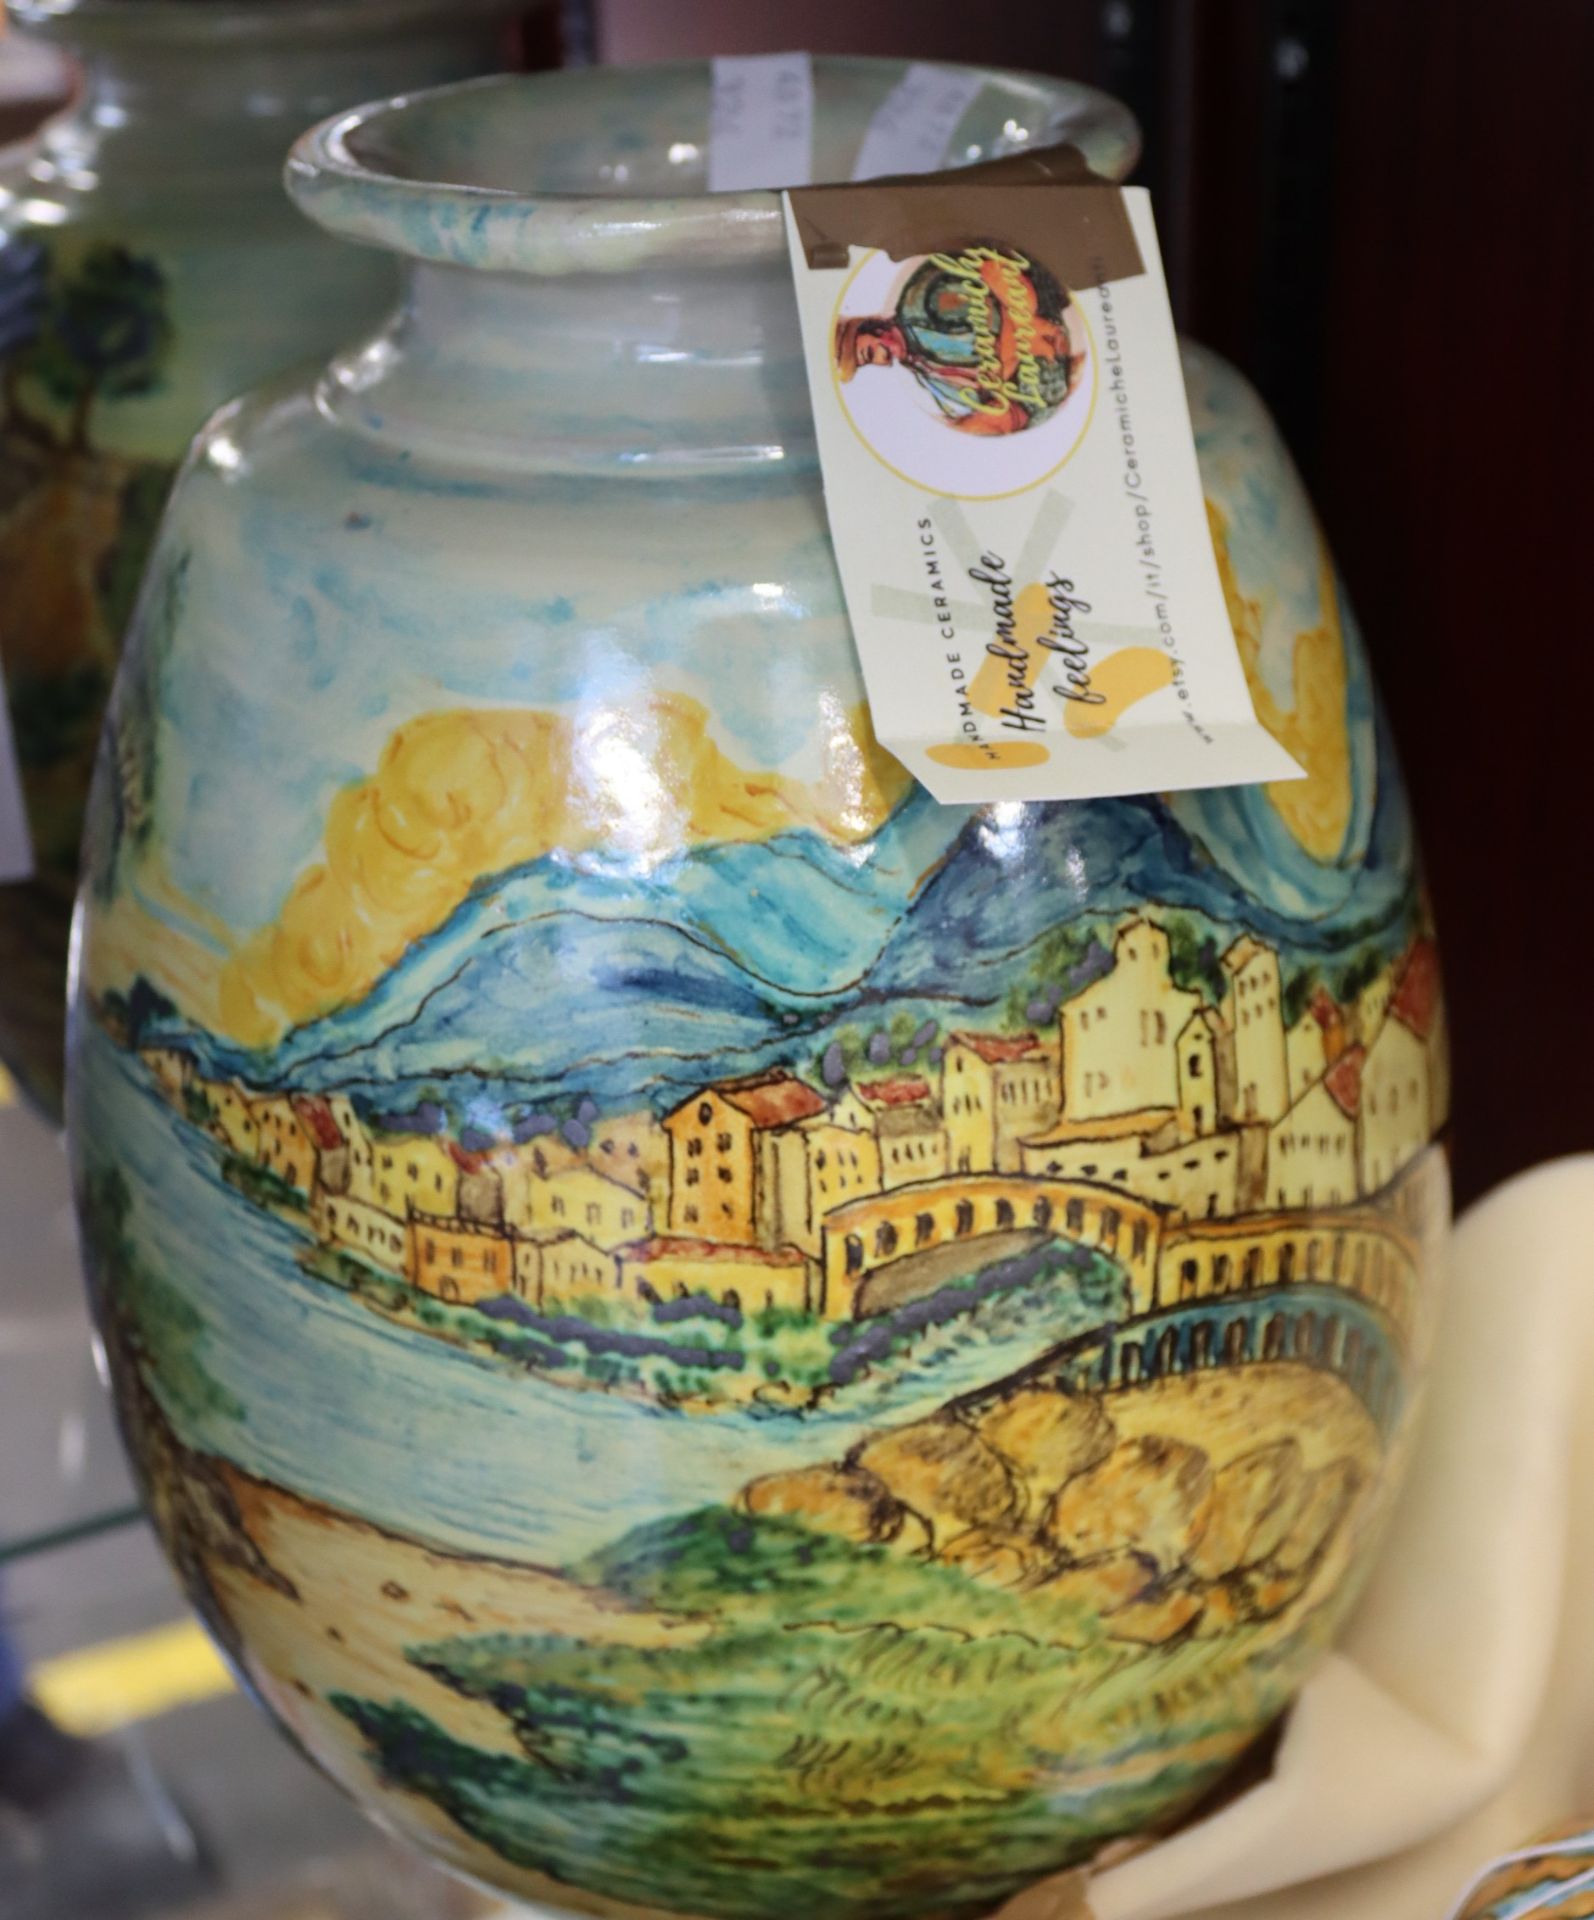 A handmade vase picturing an Italian landscape and a ceramic bauble from Ceramiche Laureanti.